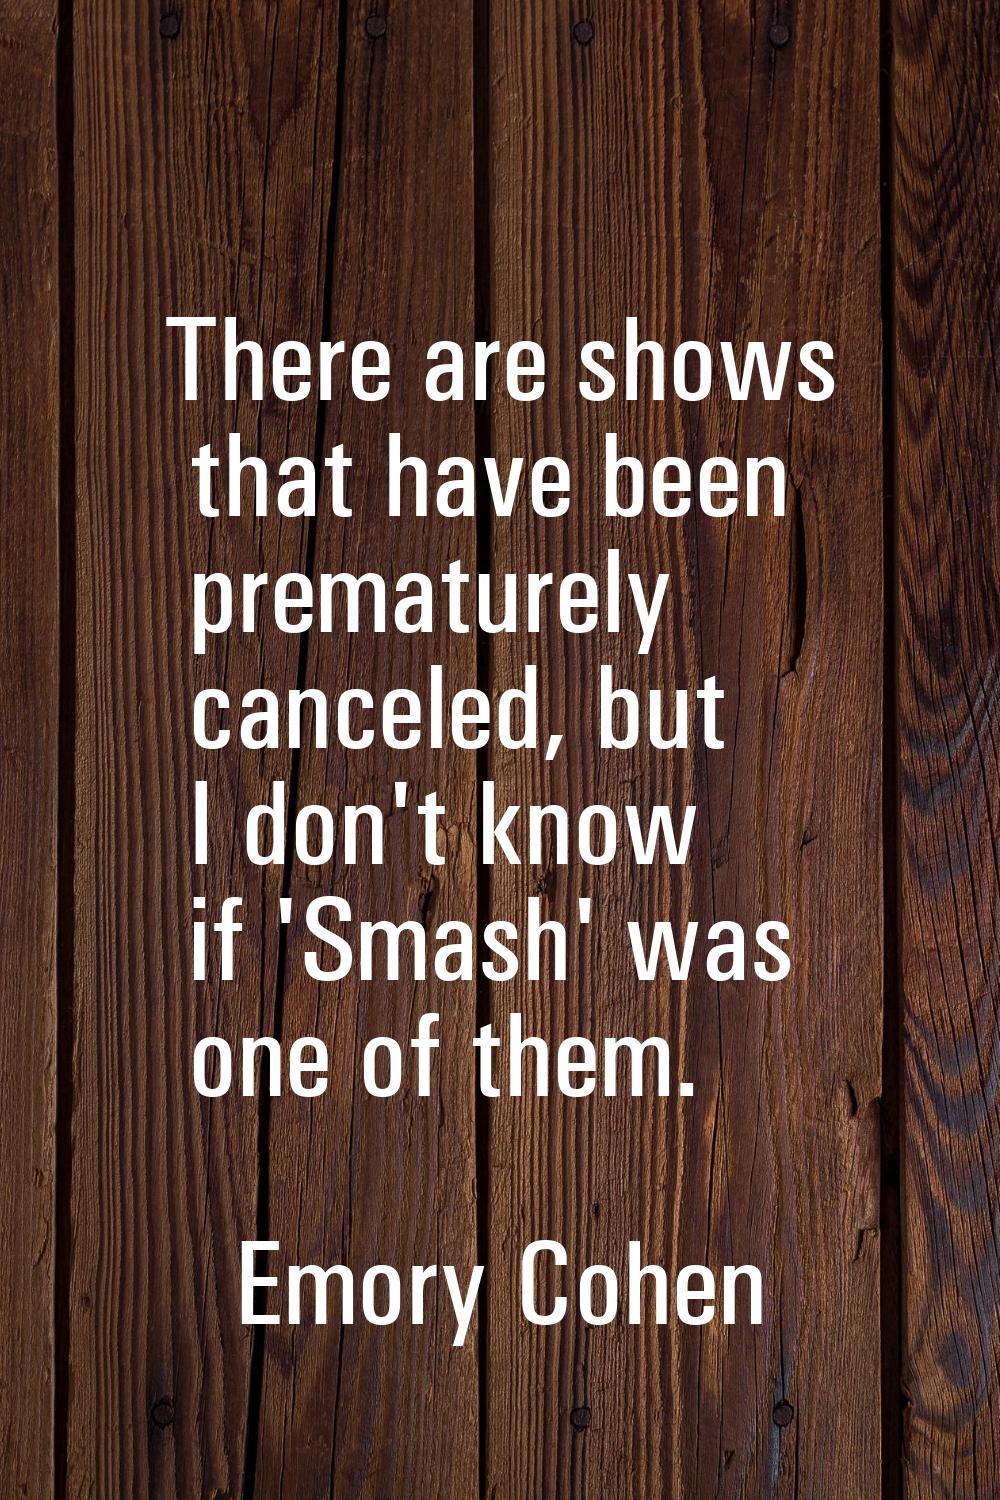 There are shows that have been prematurely canceled, but I don't know if 'Smash' was one of them.